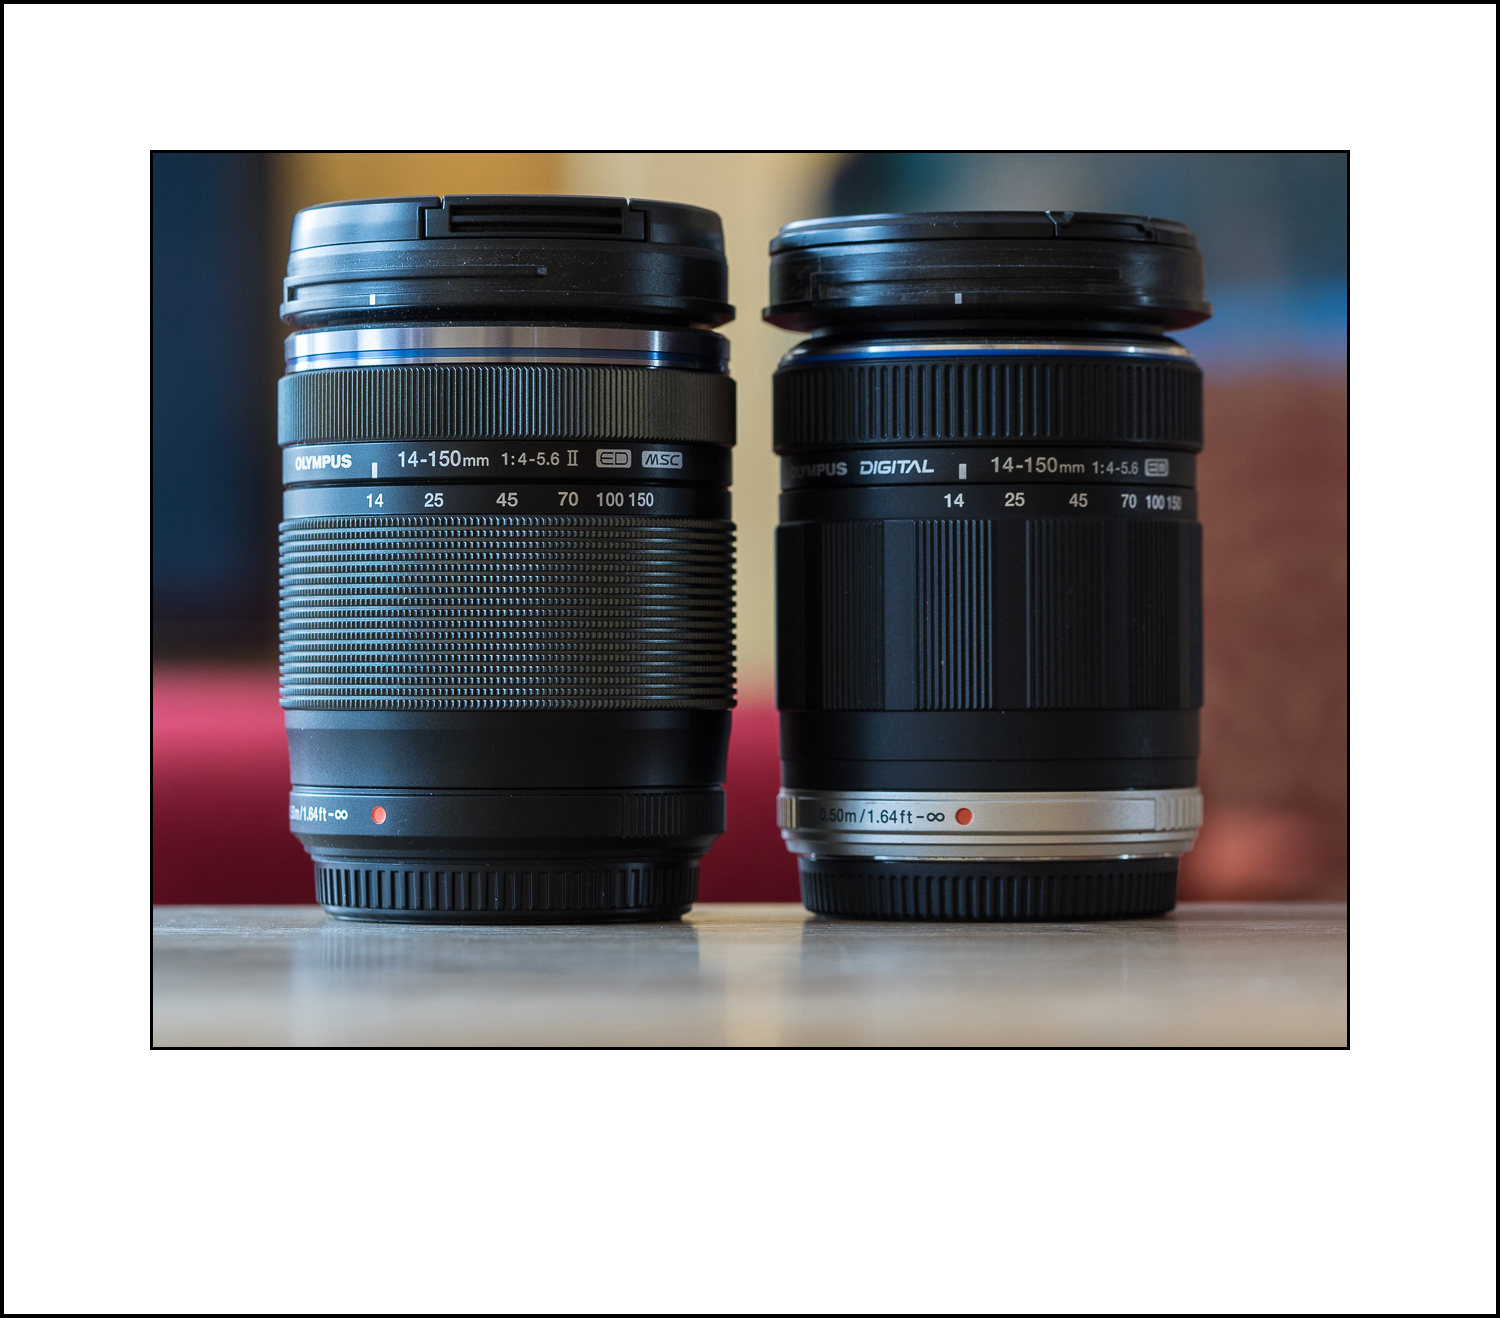 The two Olympus 14-150 lenses